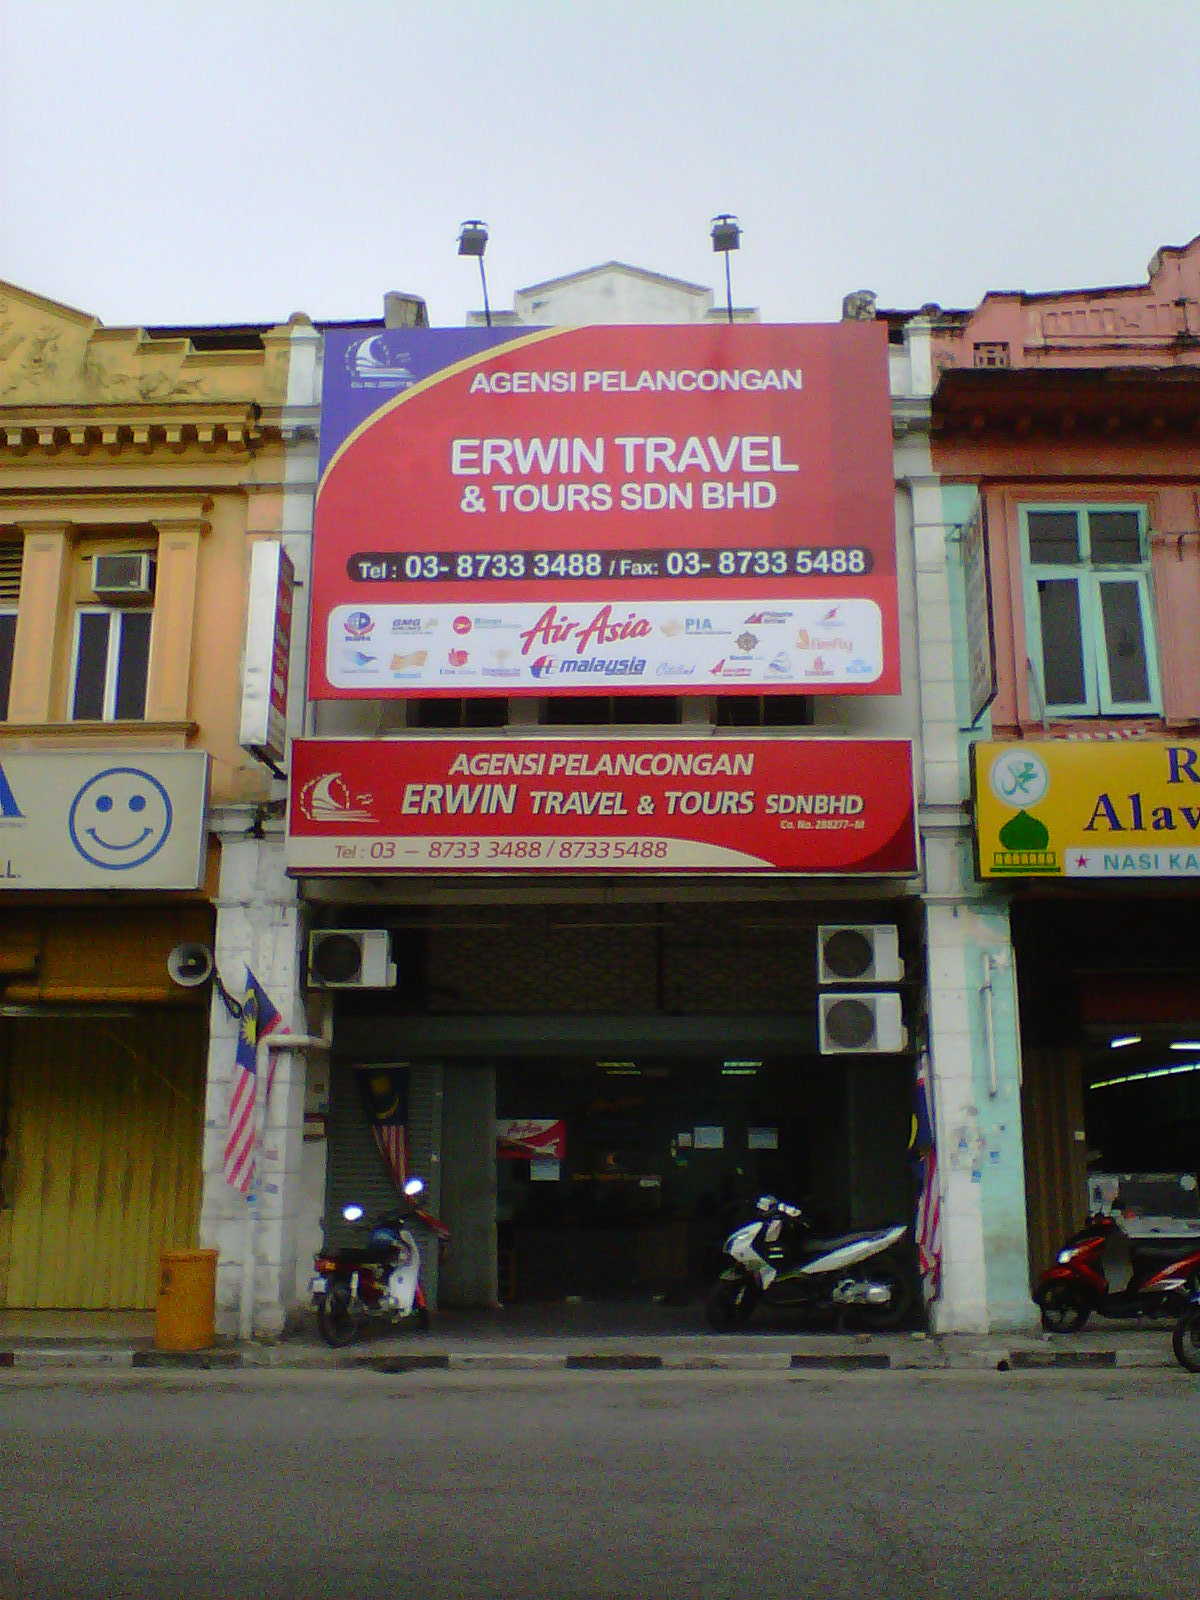 ERWIN TRAVEL & TOURS SDN BHD: About Us